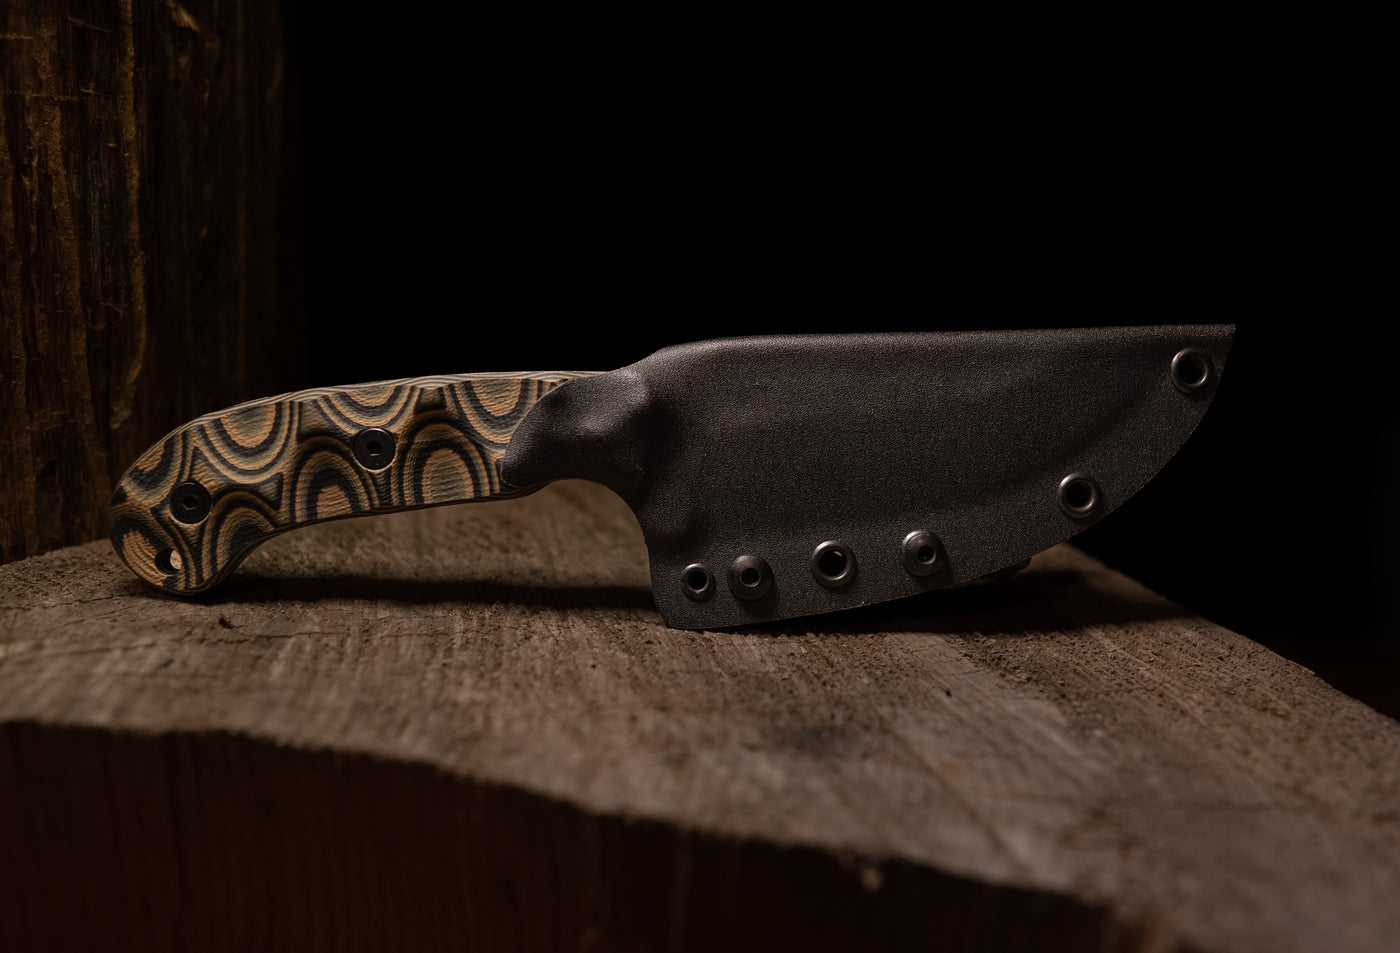 Stroup Knives - Model GP1 Fixed Blade (Handle: G10 Camo)